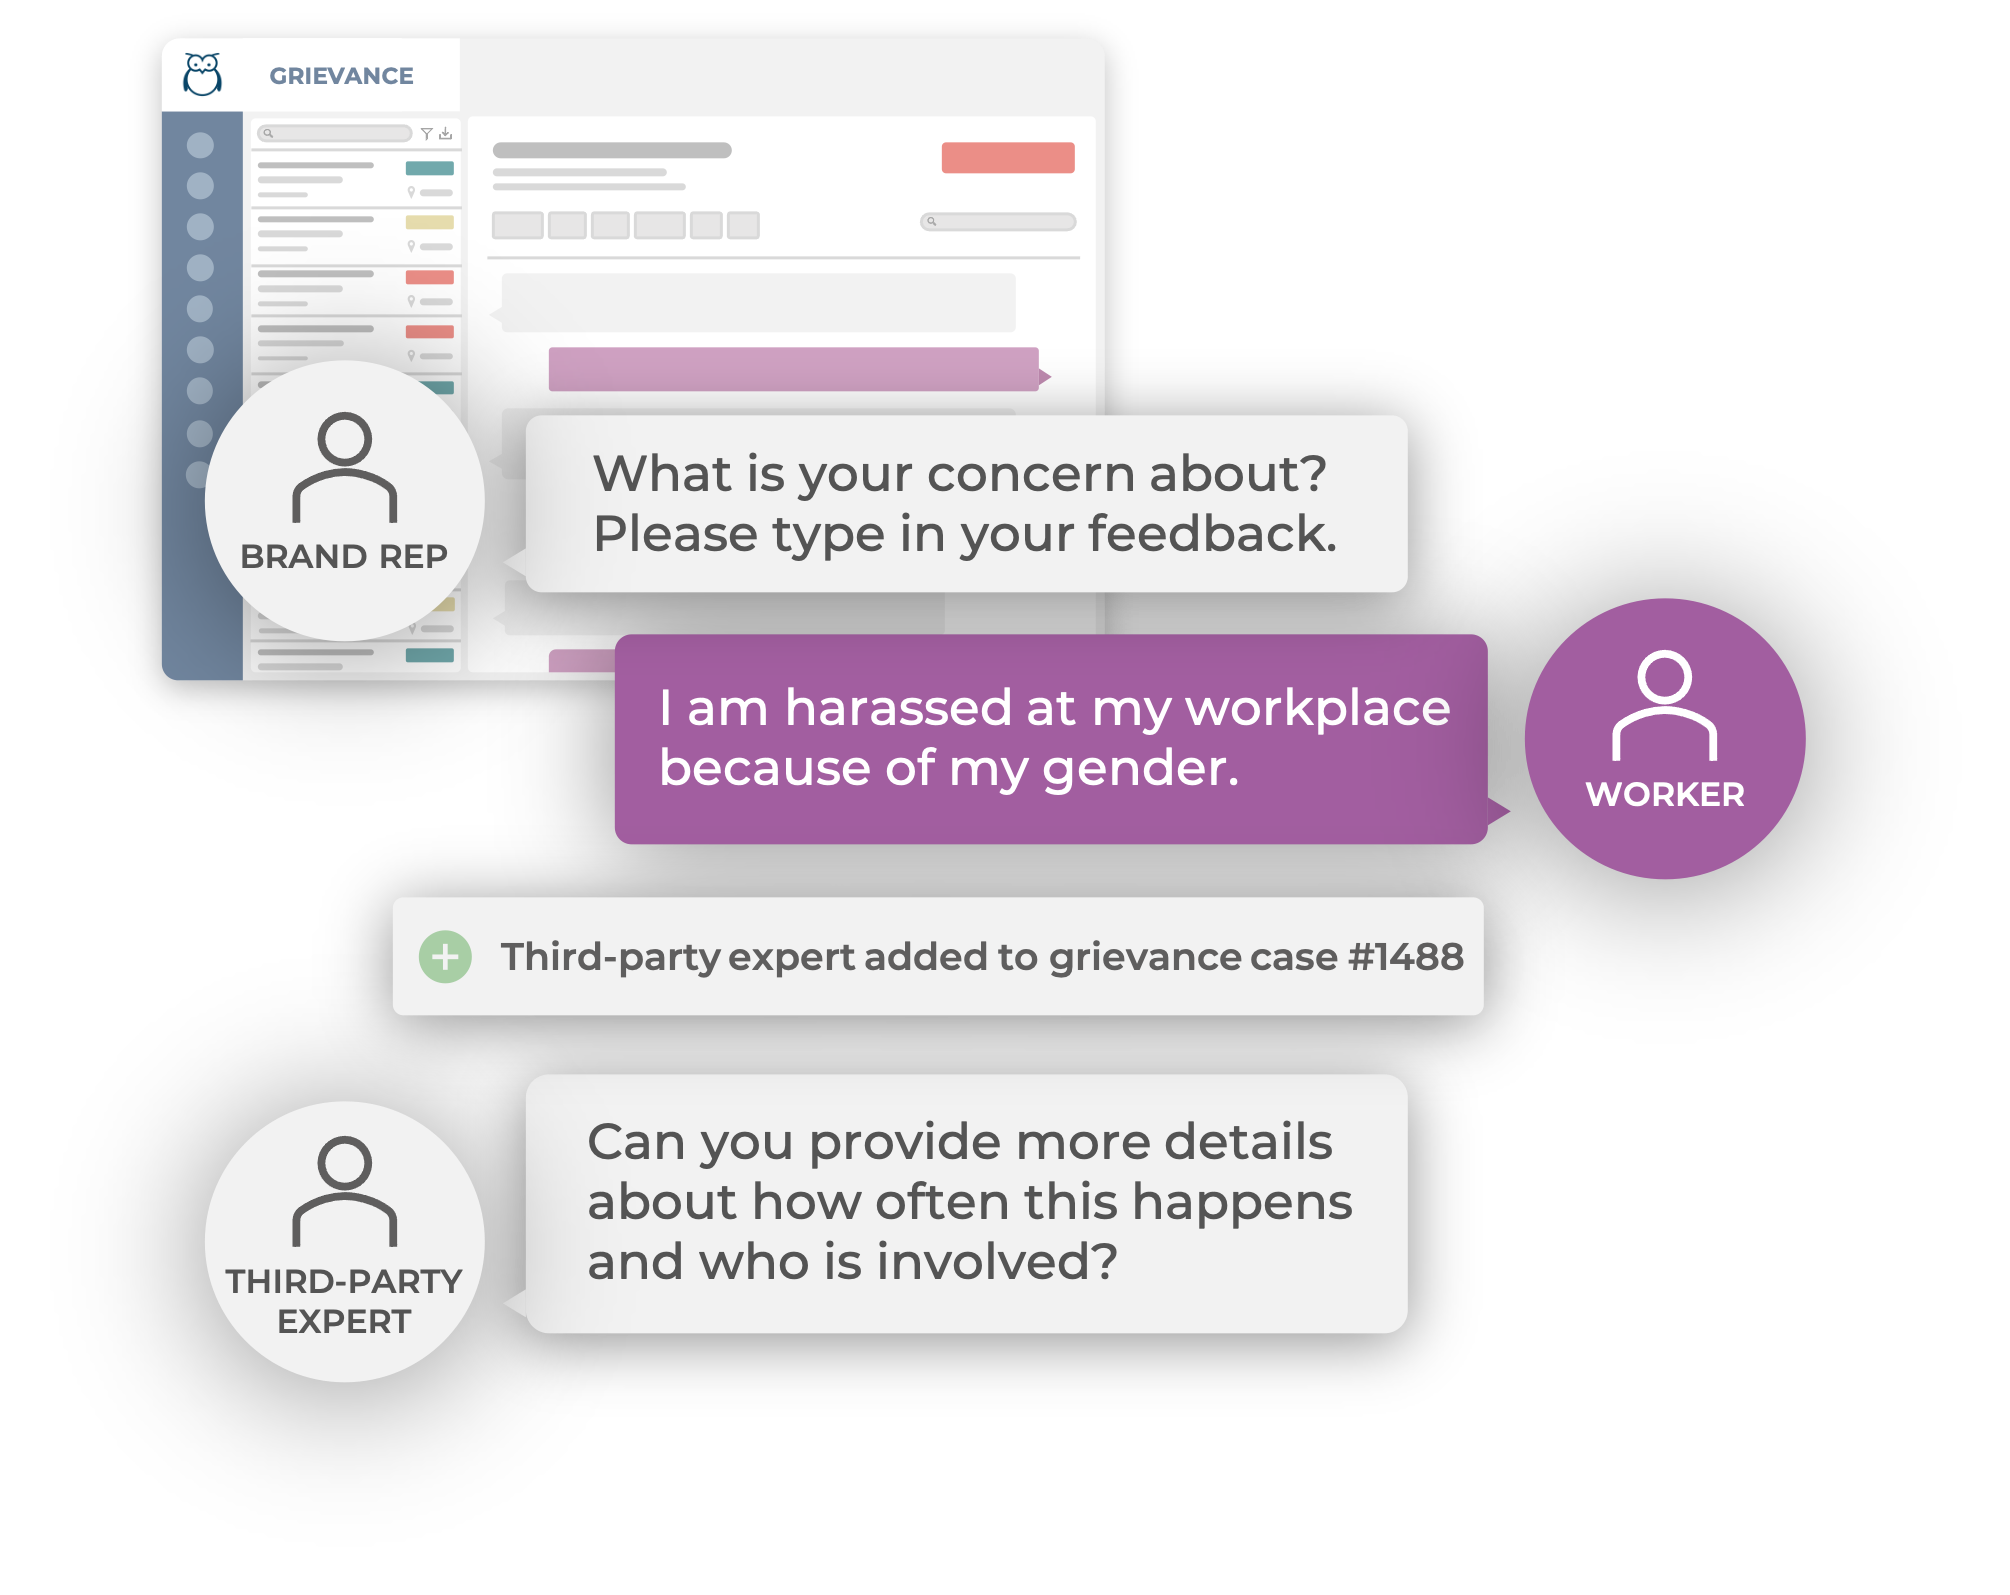 Ulula grievance platform showing two-way chat between worker, brand representative and third-party expert collaborating on a case